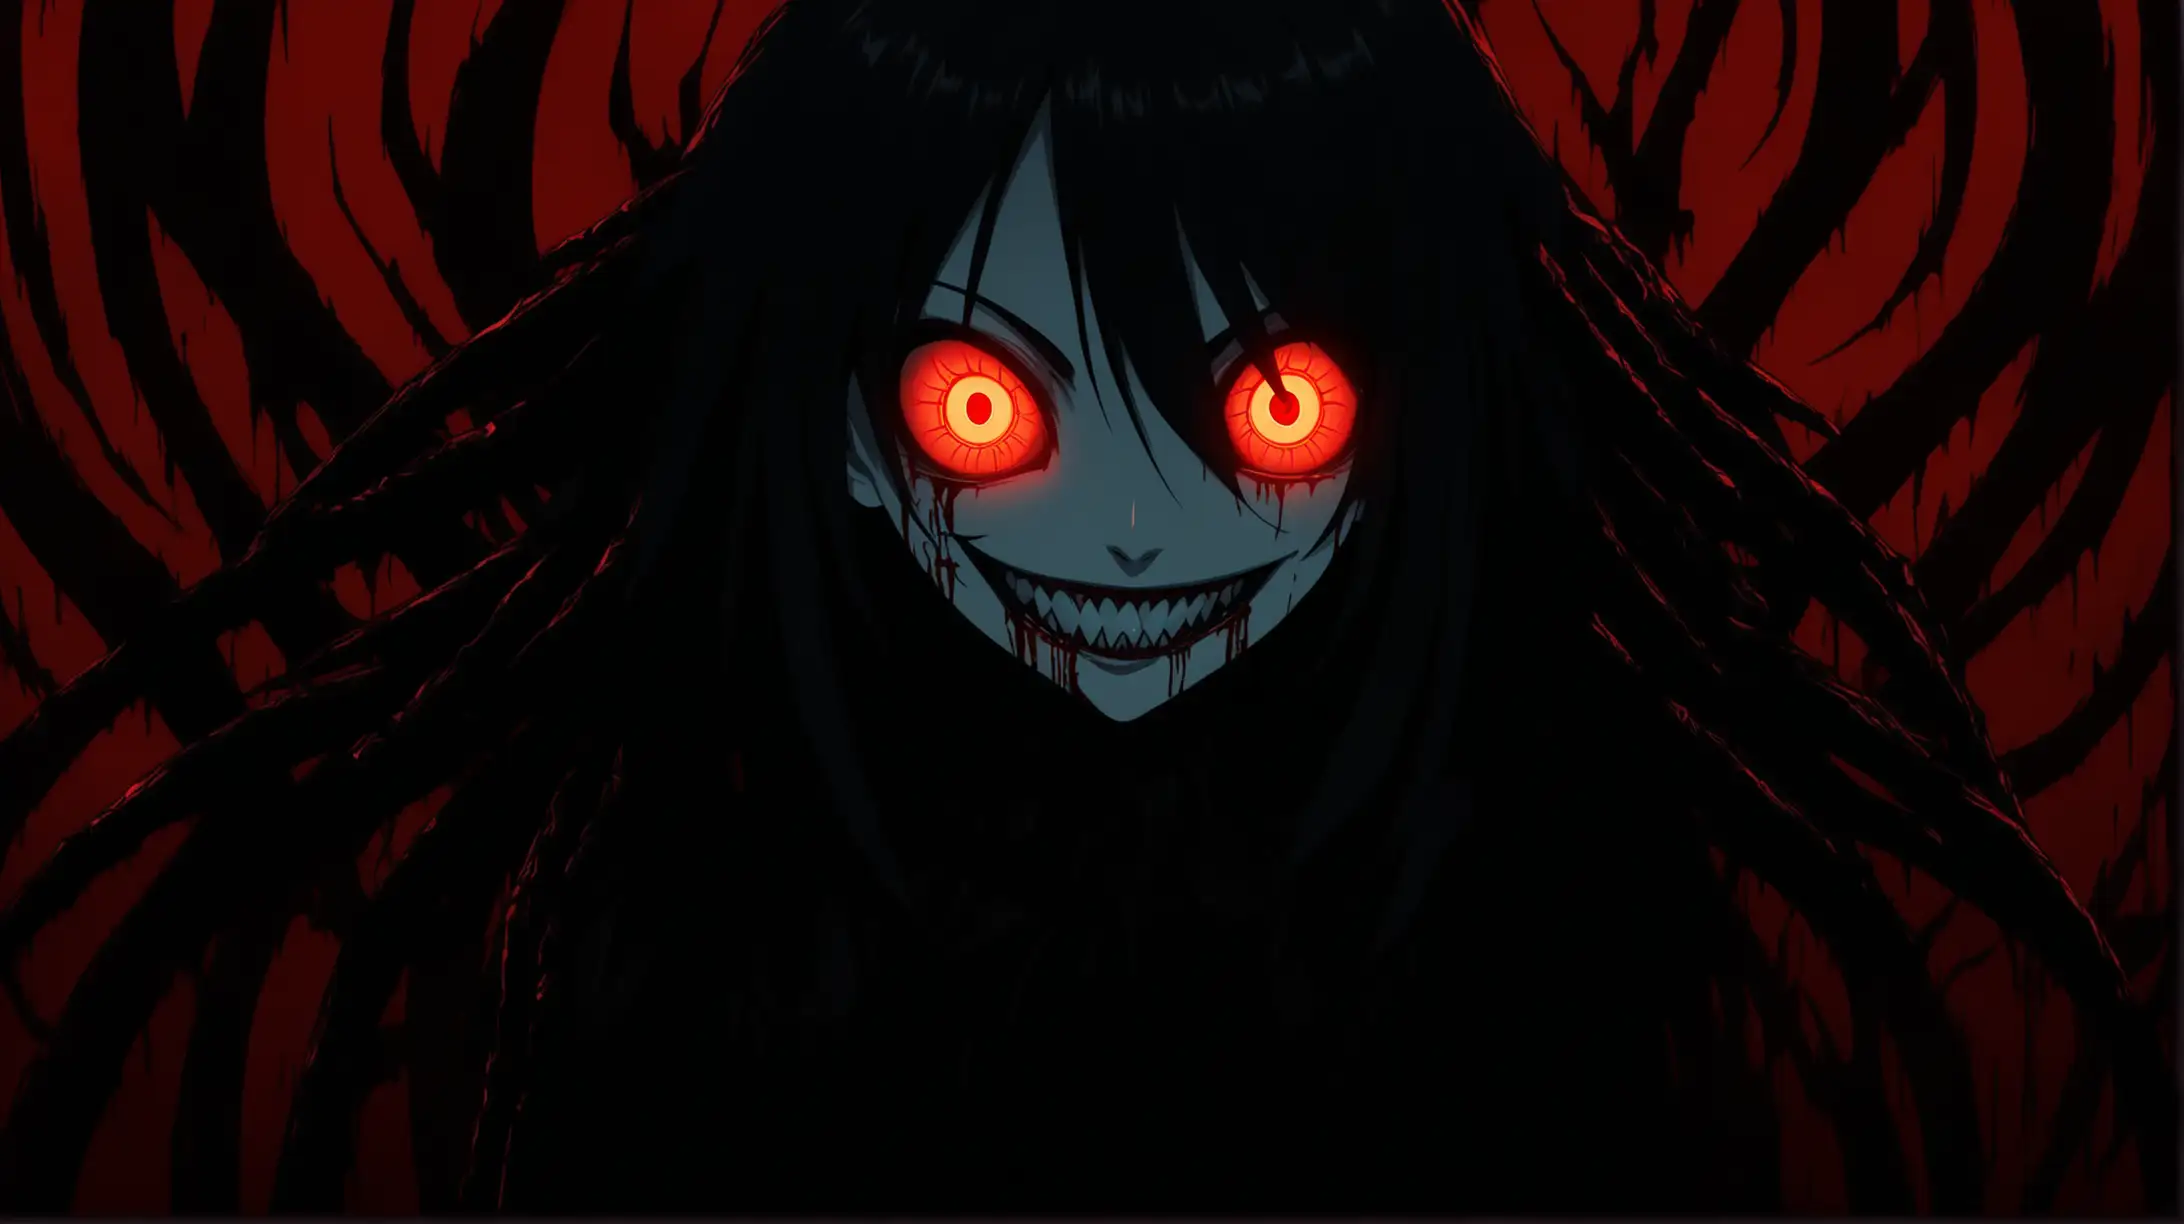 Sinister Anime Boy with Glowing Eyes on Dark Background